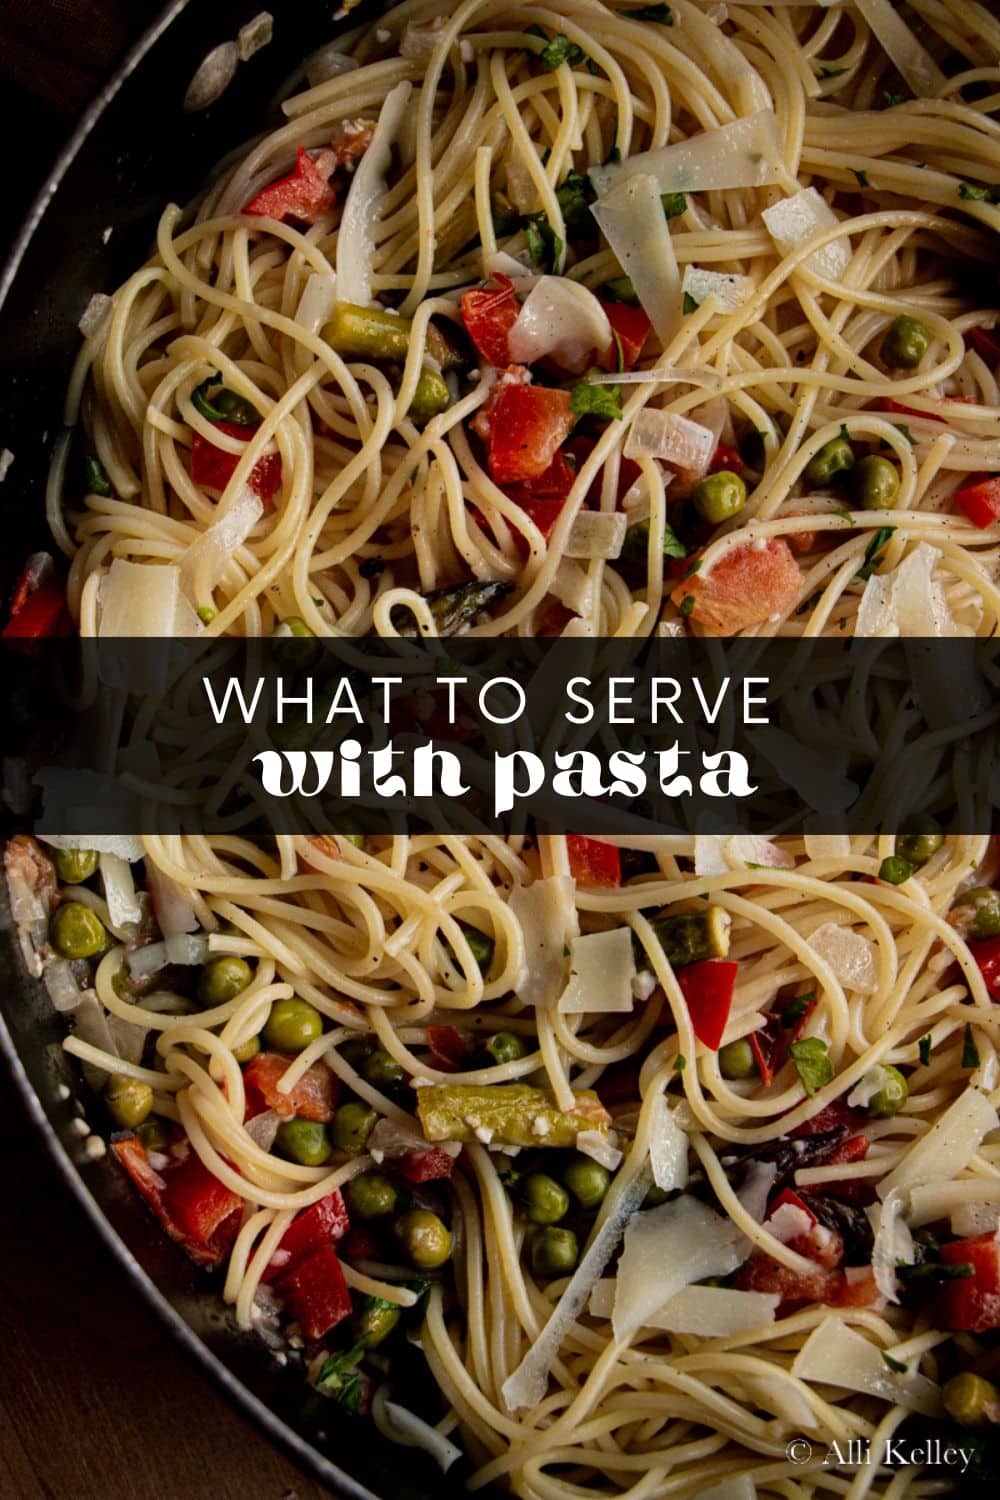 While pasta is usually the star of the show, side dishes can elevate any meal. So, don't overlook the power of these delicious pasta side dishes! This complete list has everything you could possibly want in a pasta side dish - from simple salads to hearty breads and more.